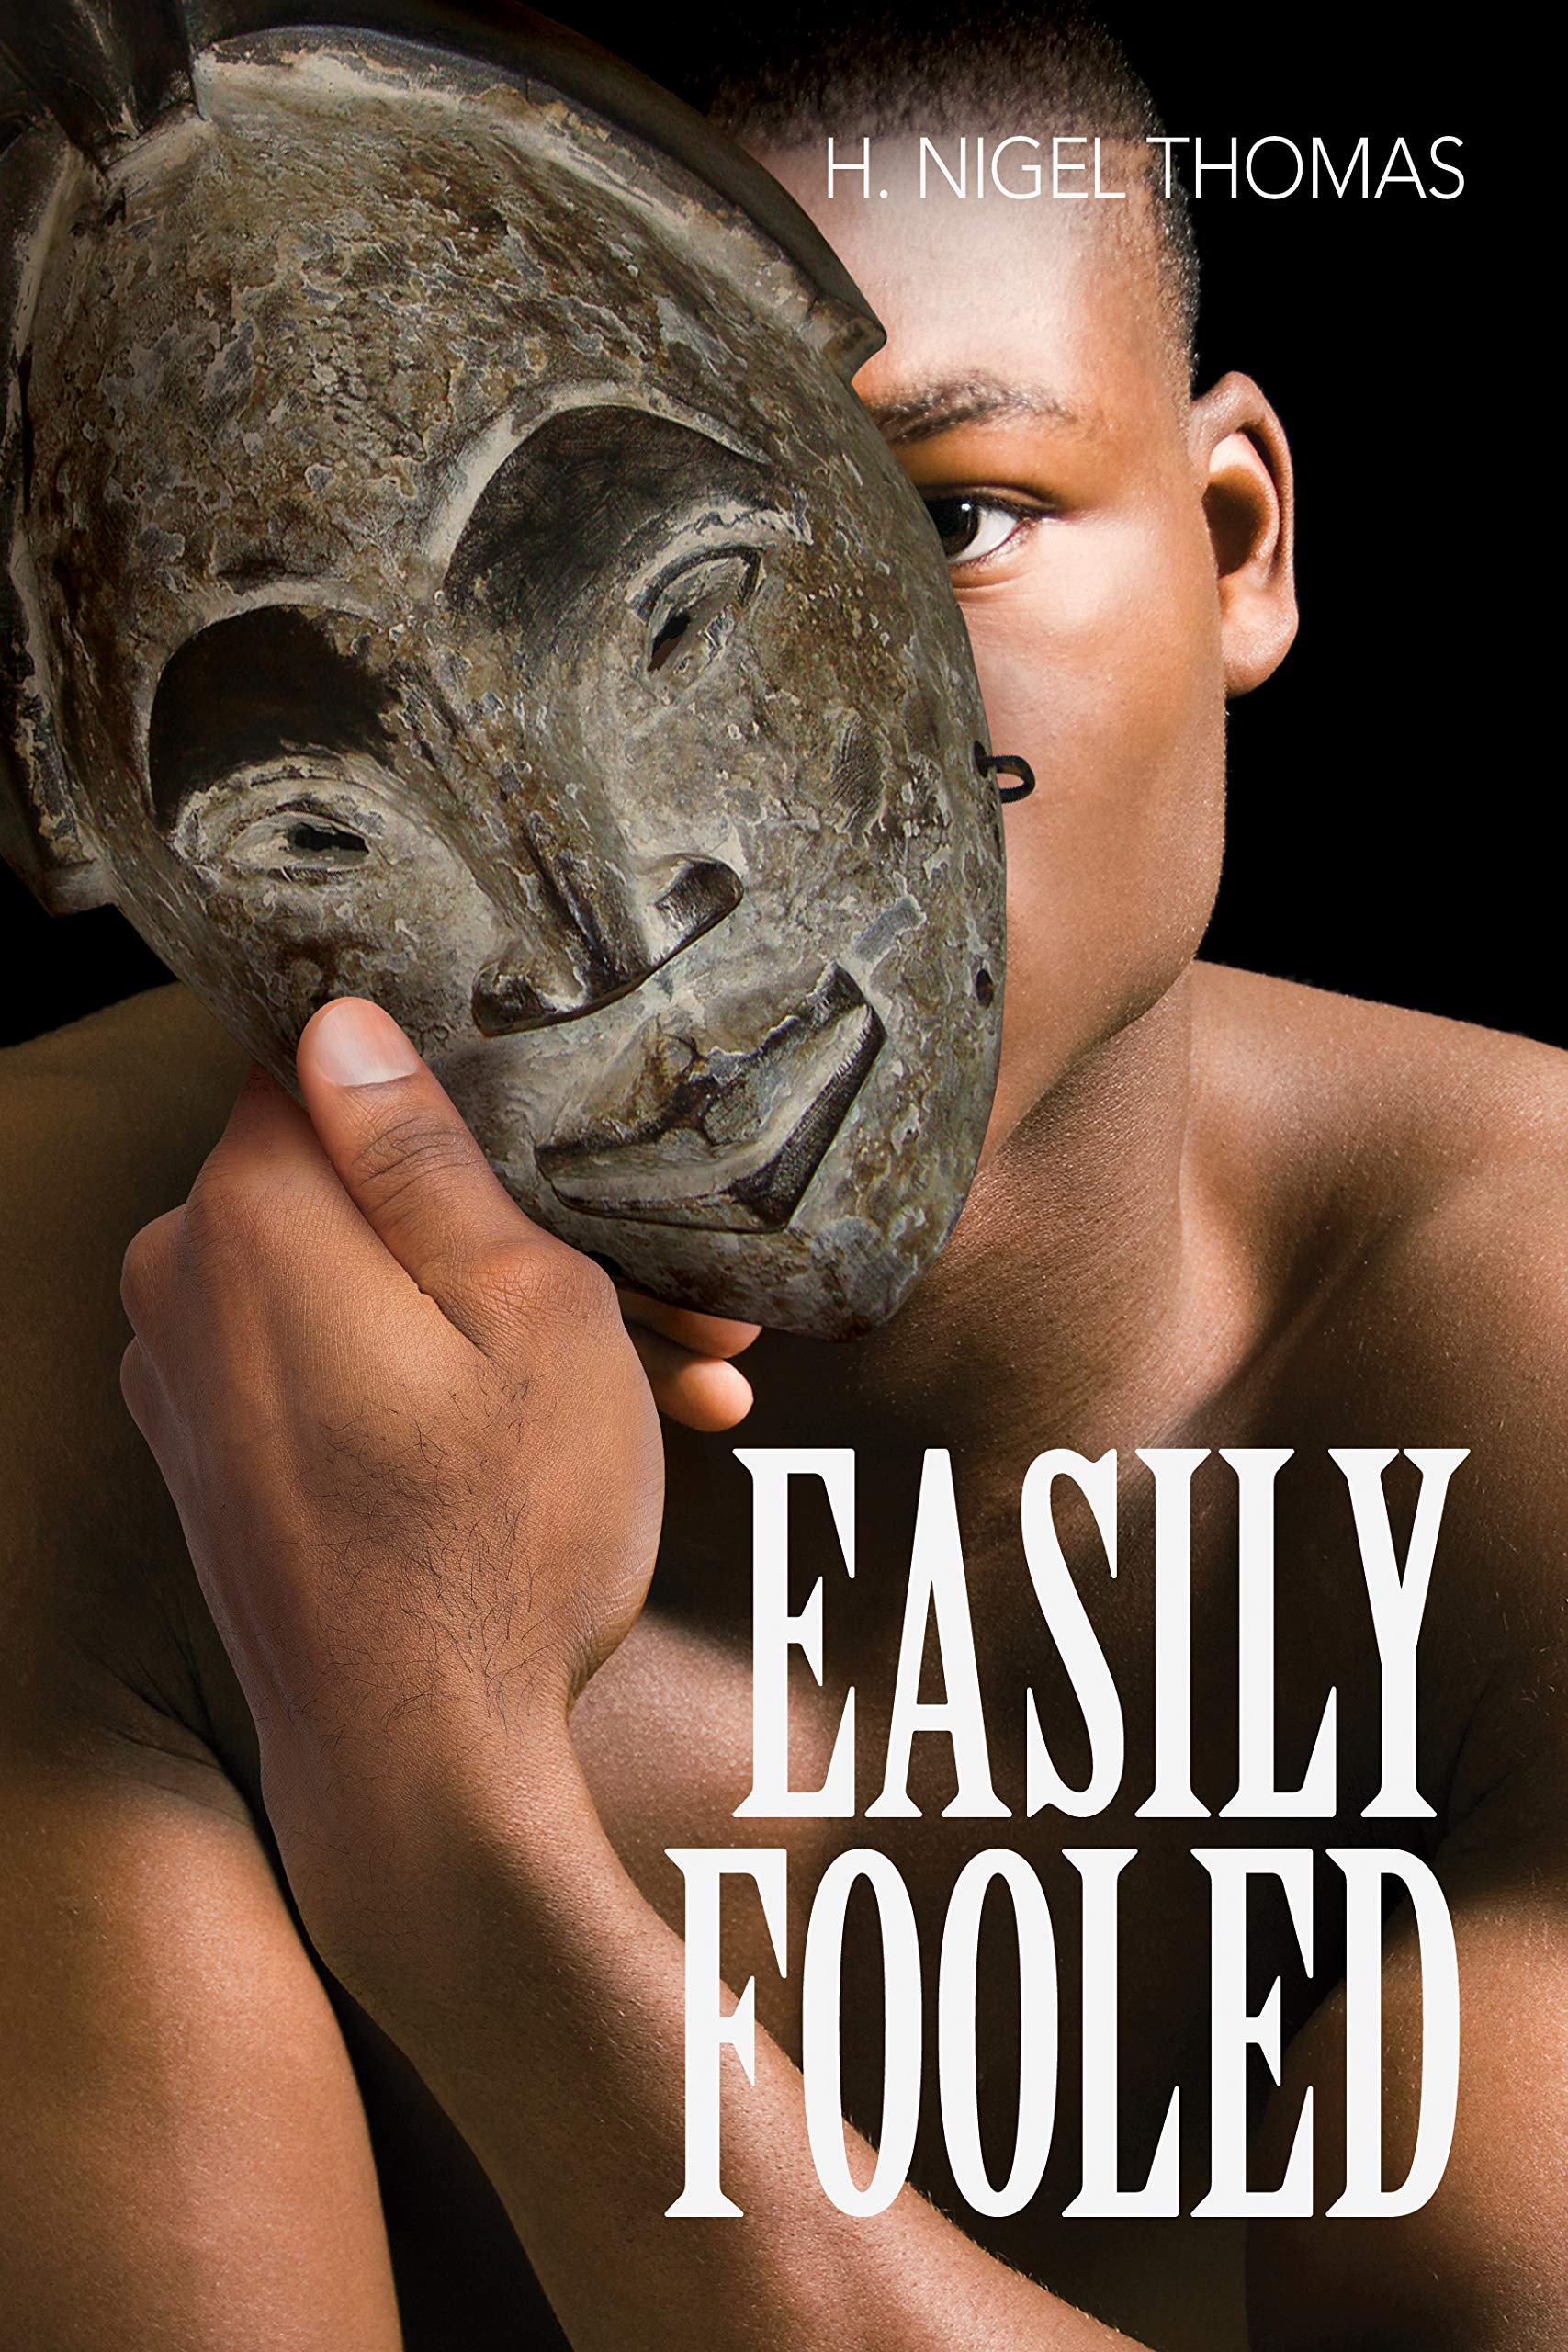 The cover of Easily Fooled